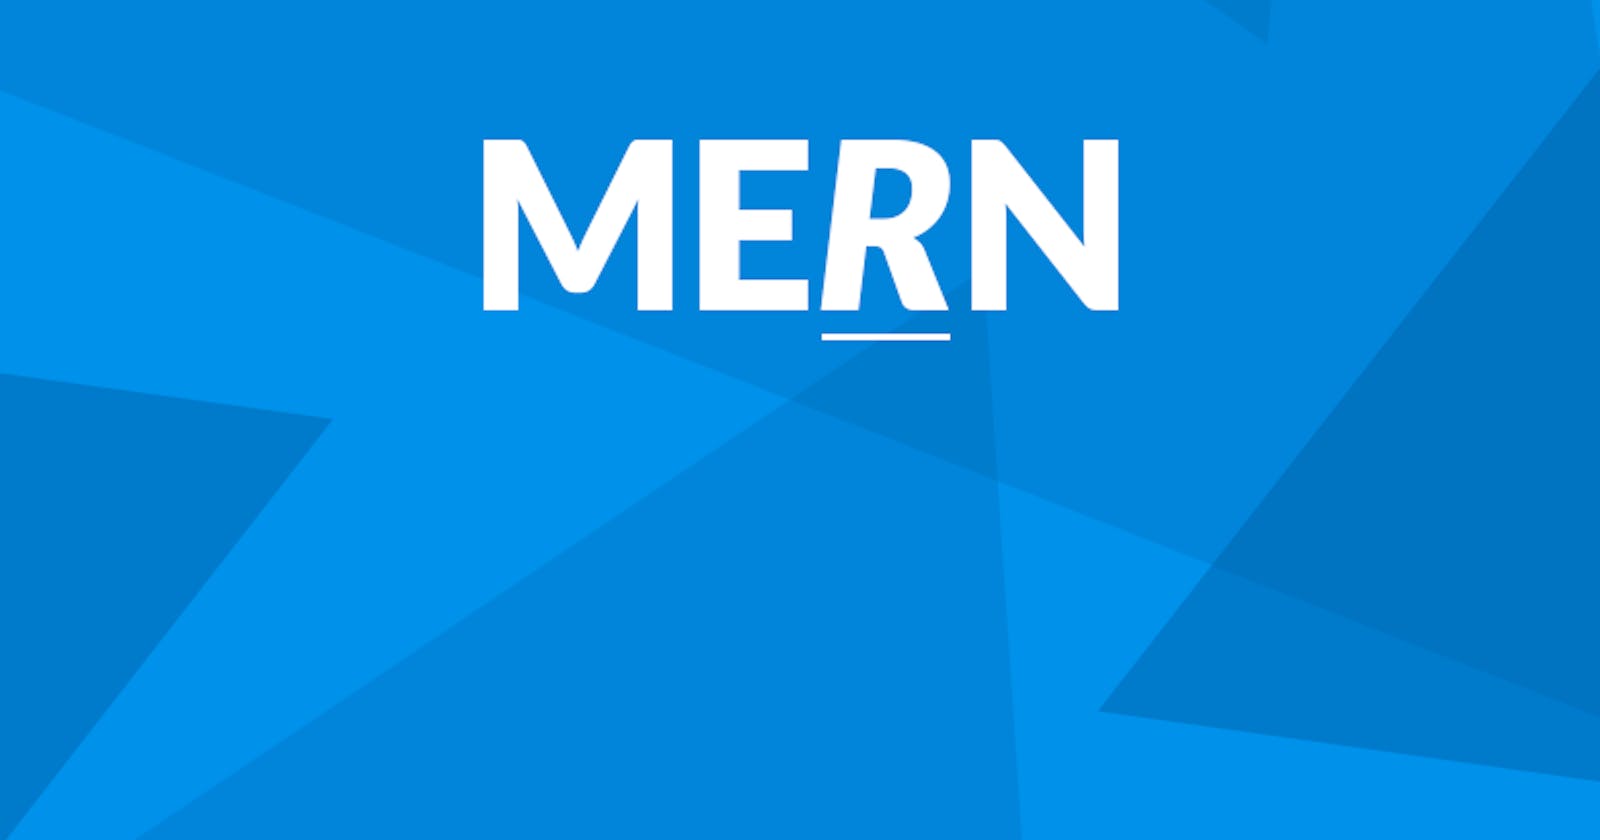 Introducing MERN : The easiest way to build Isomorphic apps